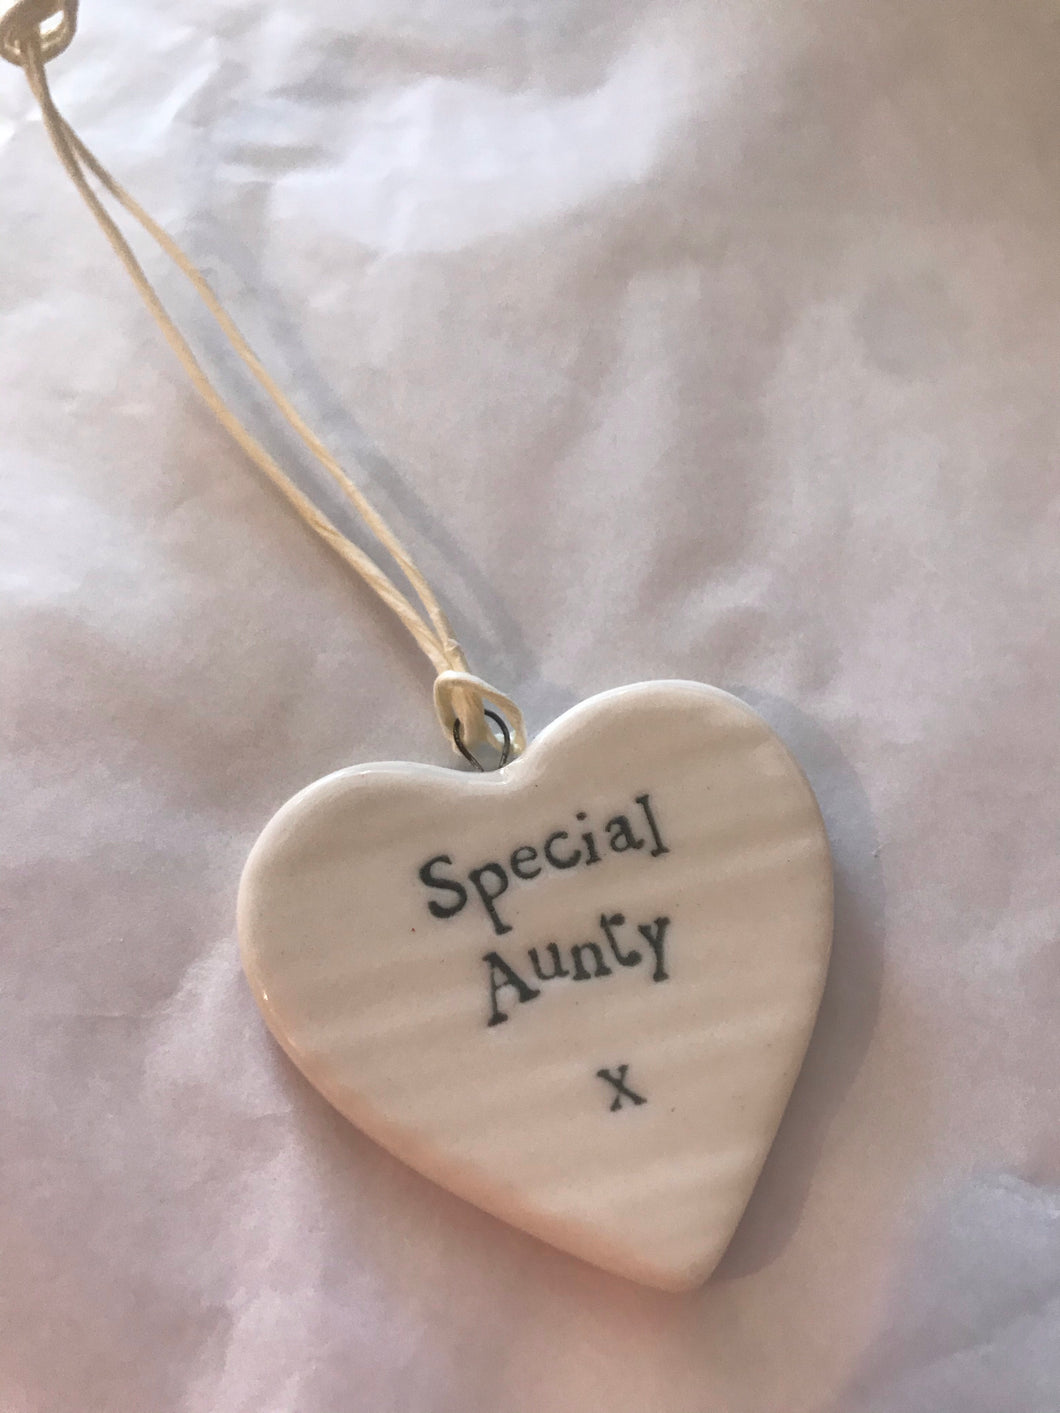 East of India Ceramic hanging heart - special Aunty